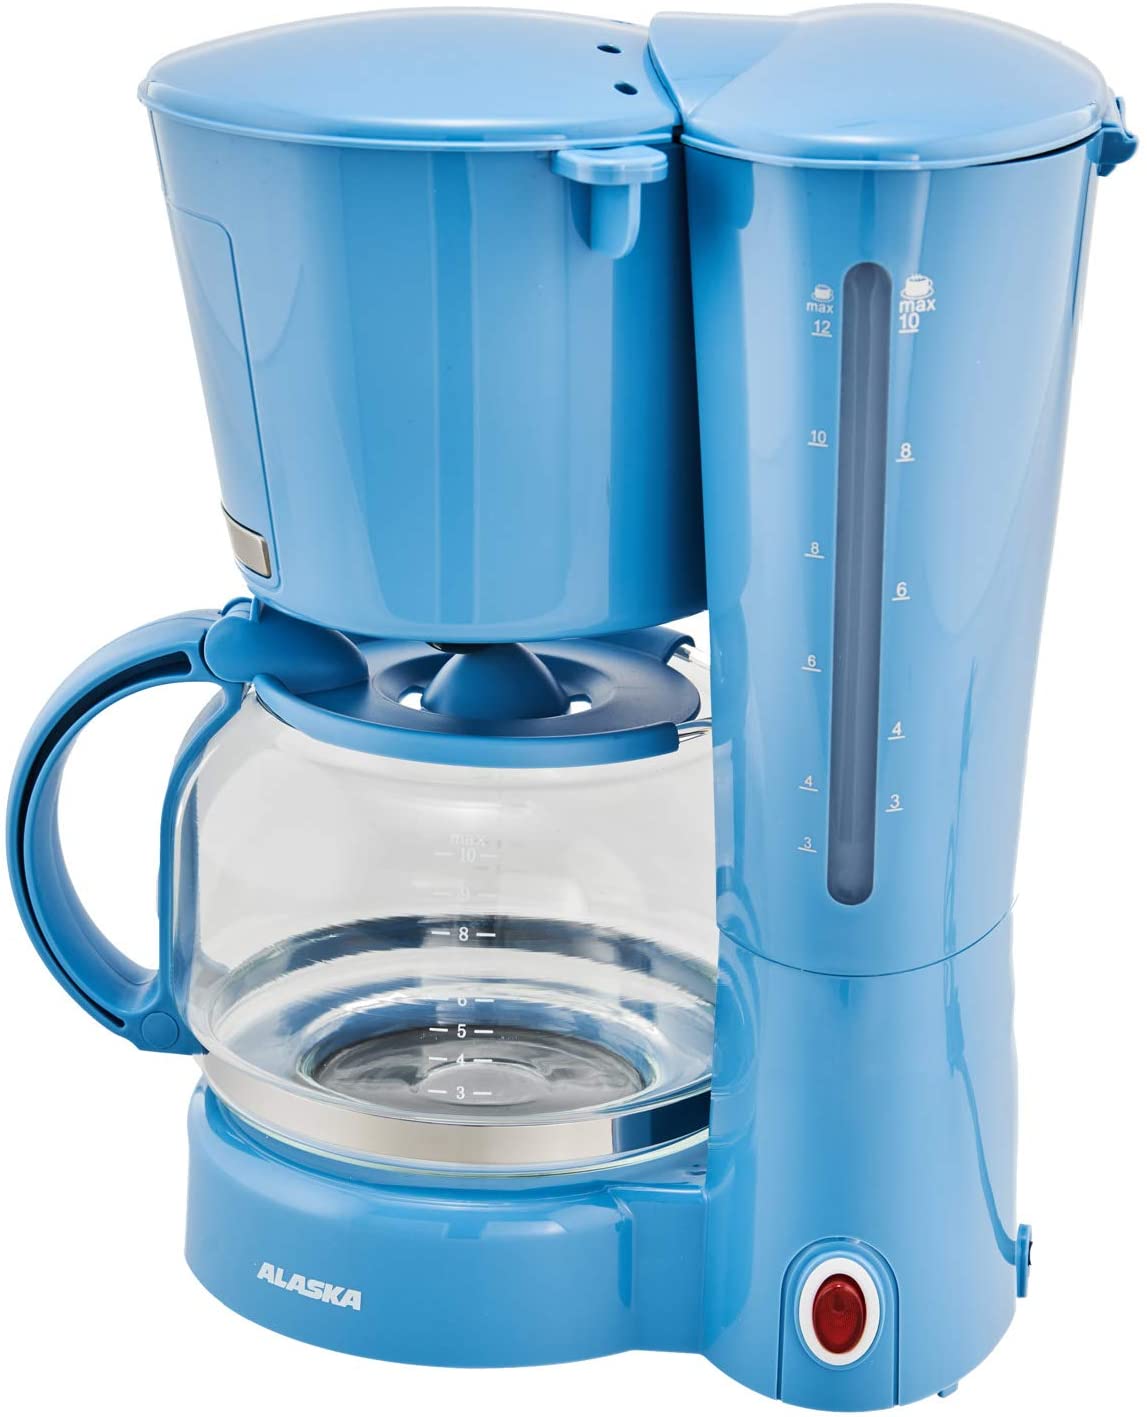 Alaska CM 2209 DSG Coffee Machine | Up to 12 Cups | 870 Watt | Removable Filter Insert | Filter Size 1 x 4 | Drip Stop Function | Water Level Indicator | Keep Warm Function | Operating Control Light (Blue)